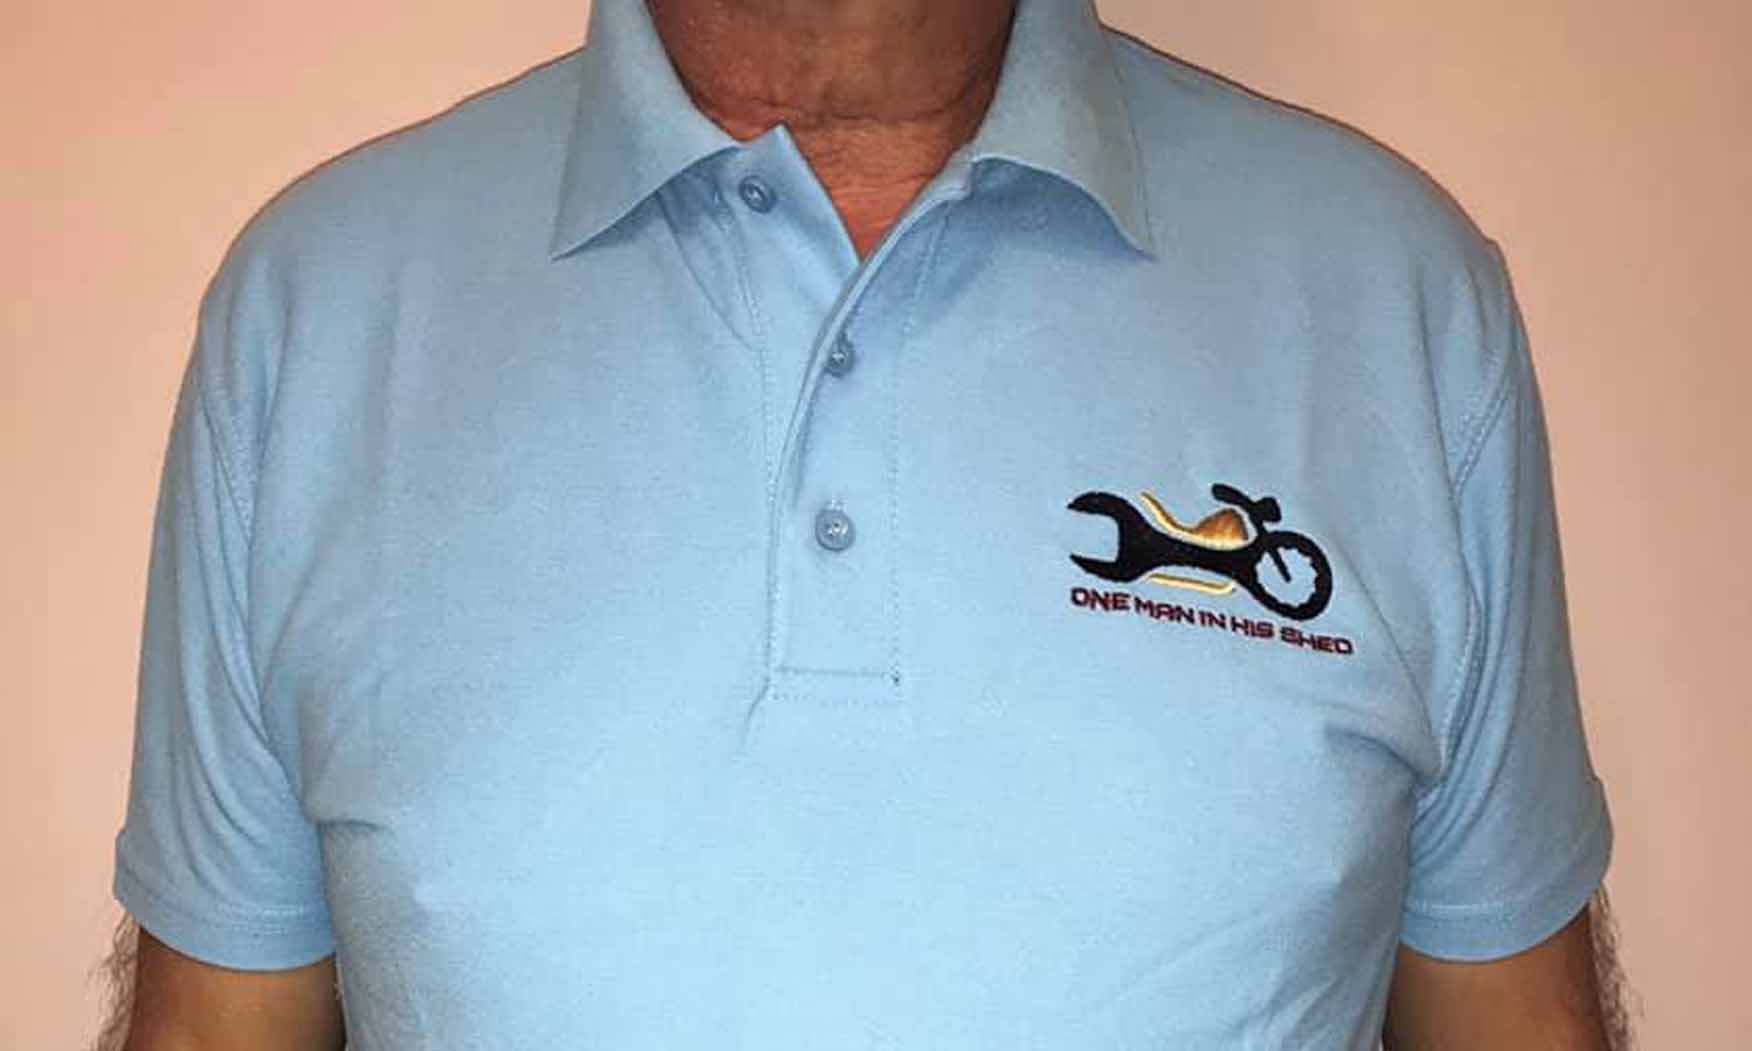 One Man in his Shed Polo Shirt